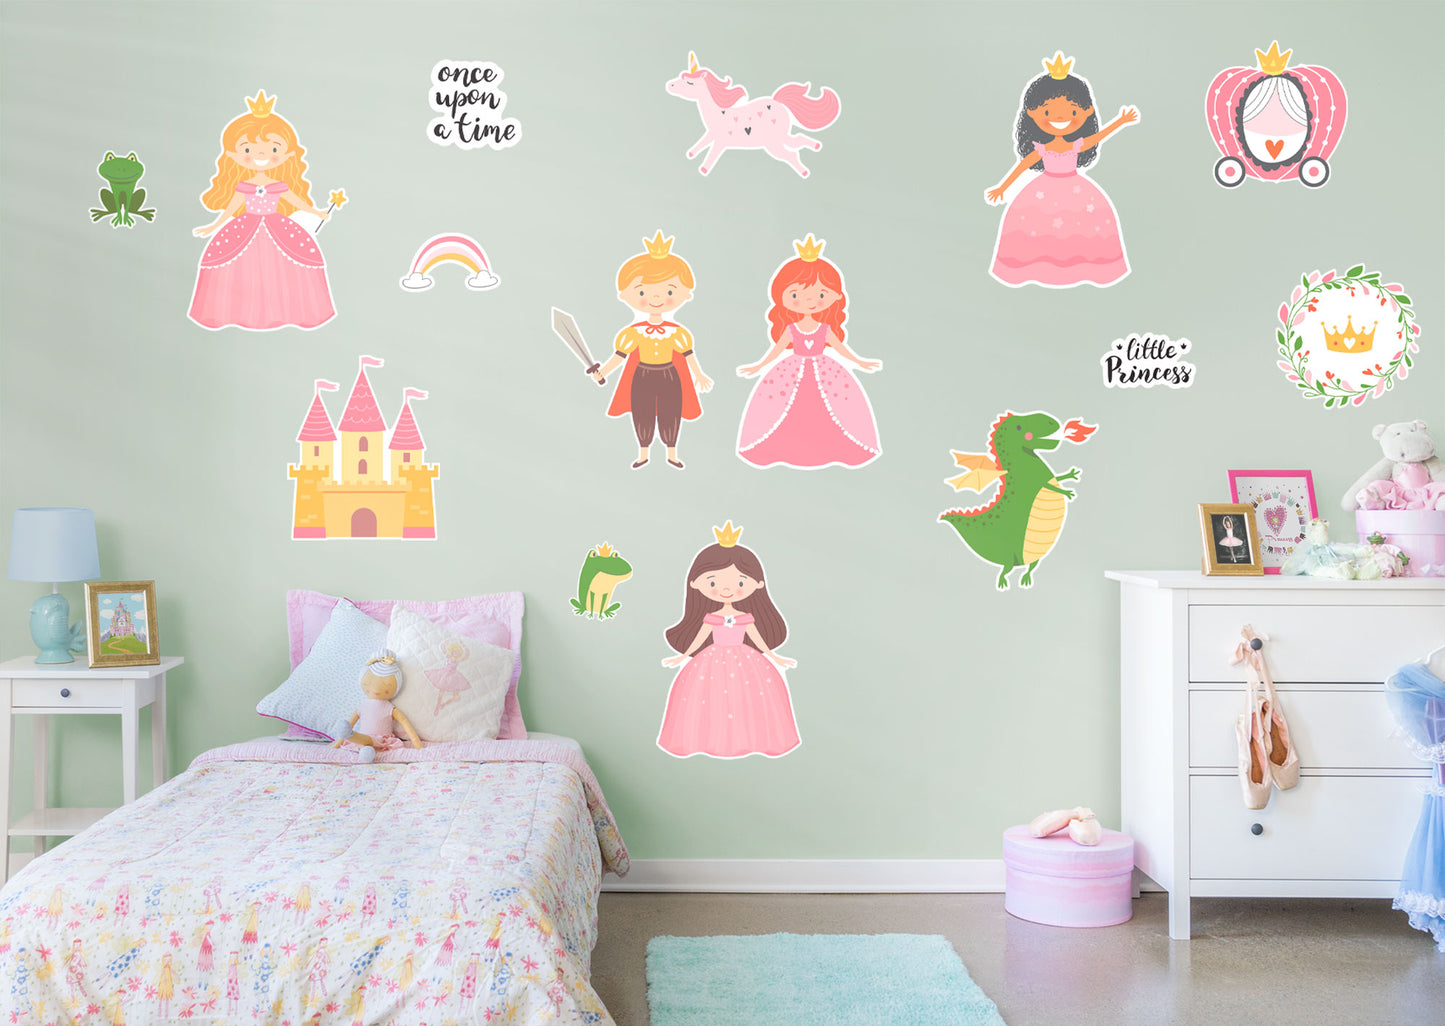 Nursery:  Once Upon a Time Collection        -   Removable Wall   Adhesive Decal